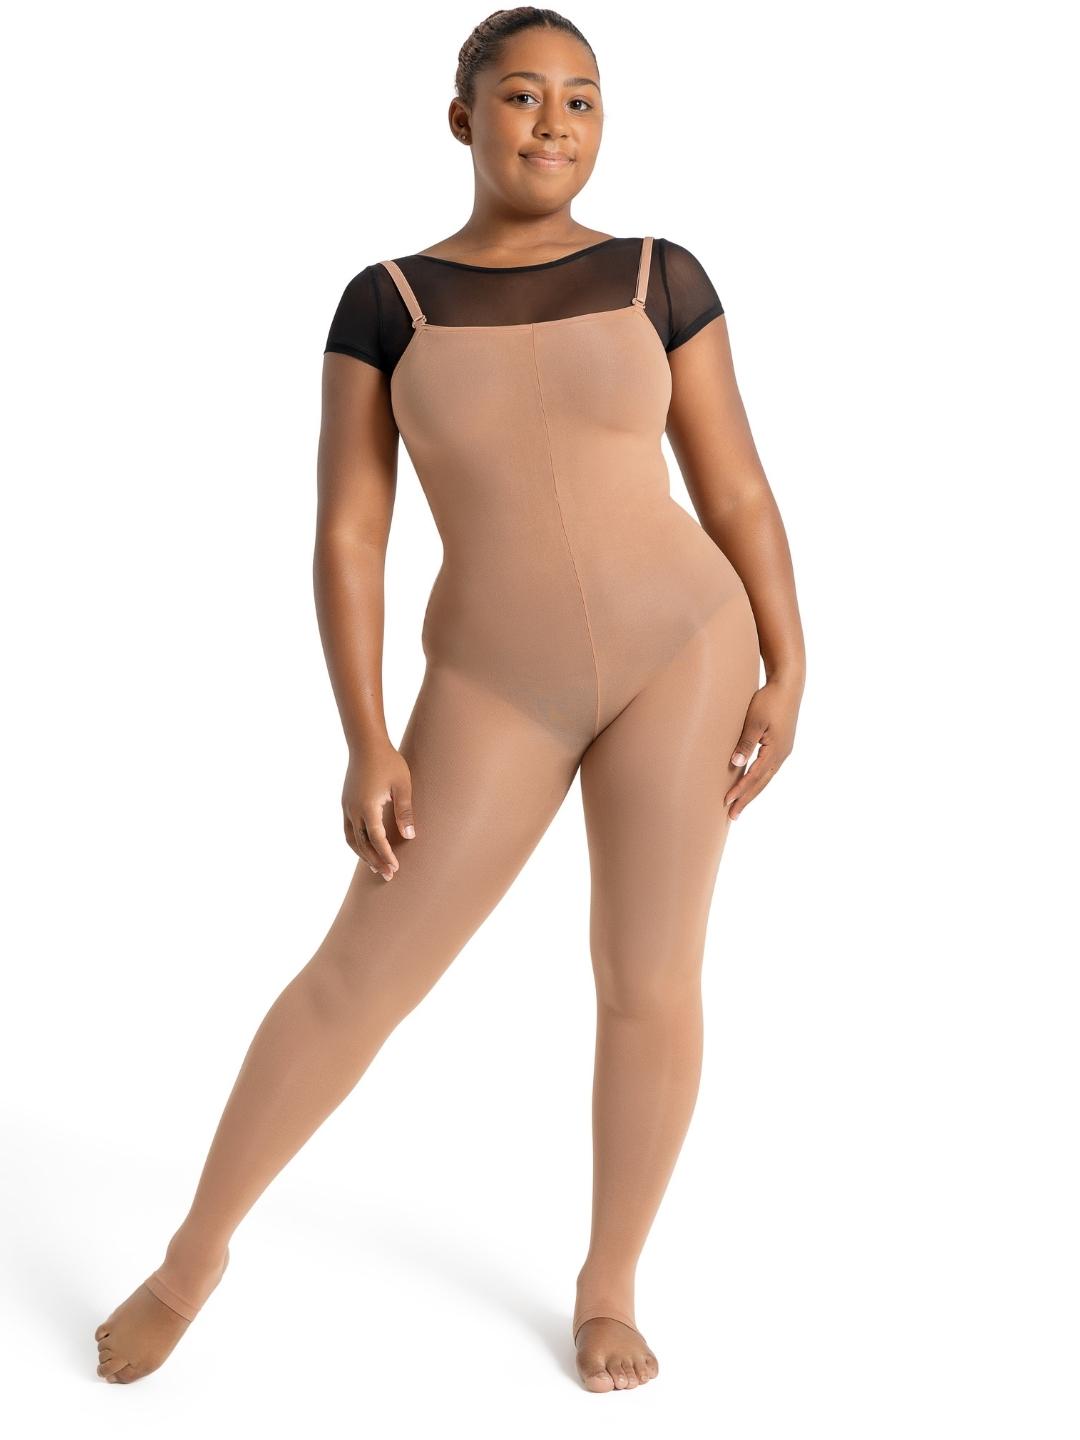 angela blain recommends leotard and tights pics pic